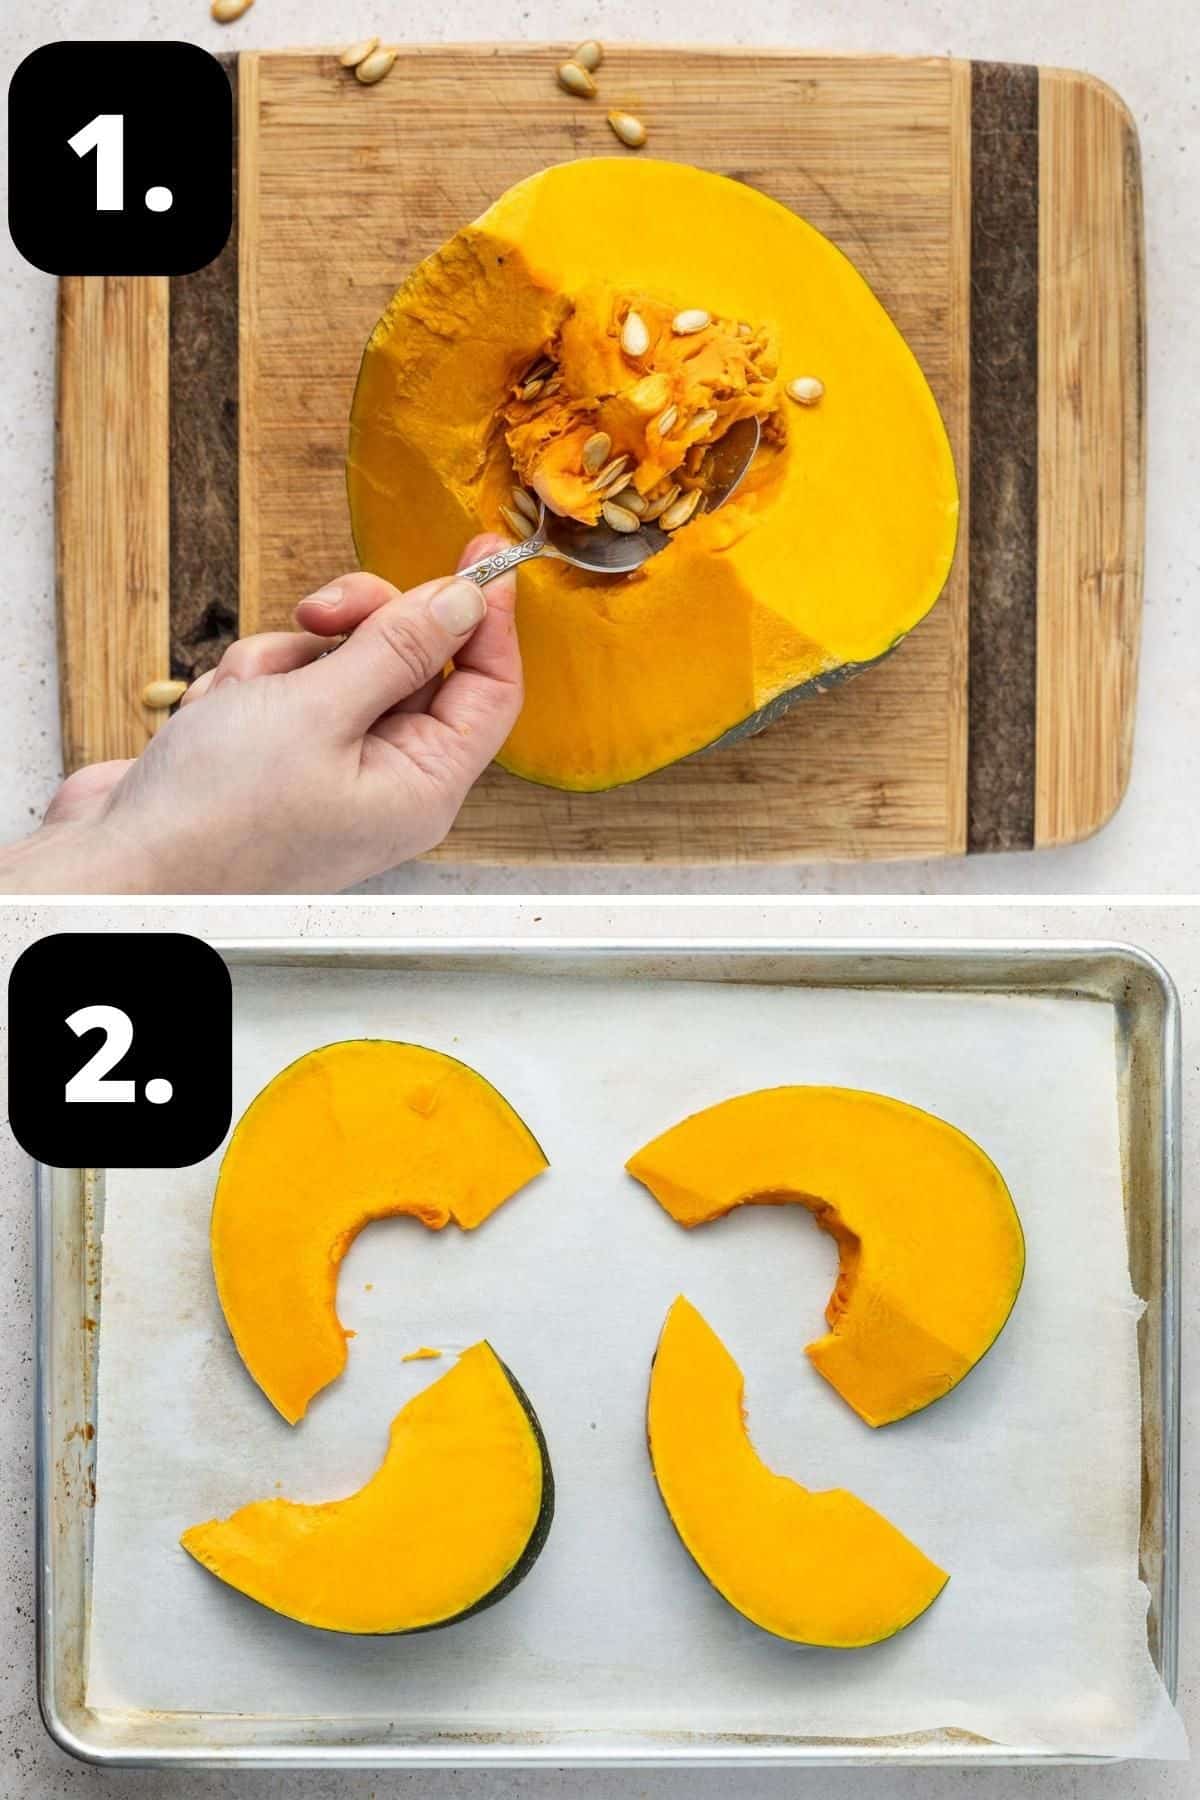 Steps 1-2 of preparing this recipe - scooping the seeds out of a piece of pumpkin, and slices of pumpkin on a baking tray.